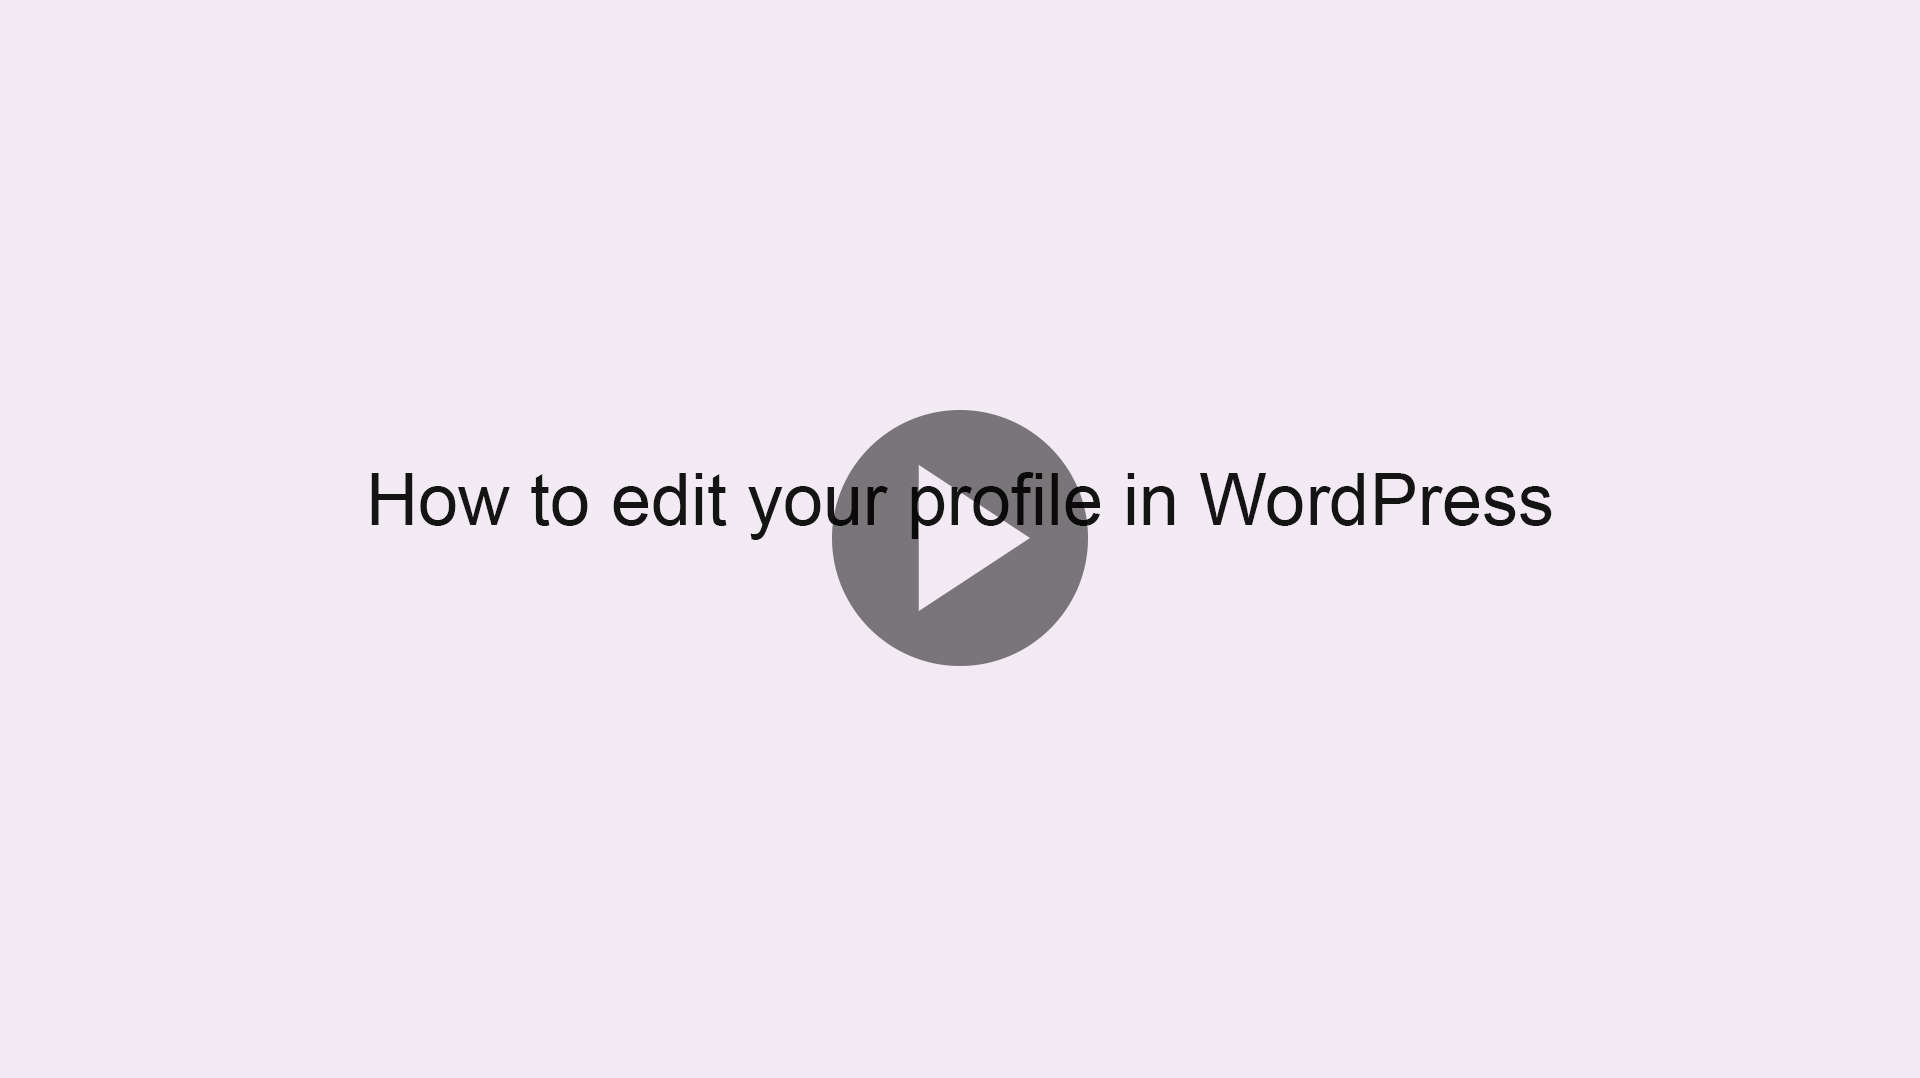 How to edit your profile in WordPress